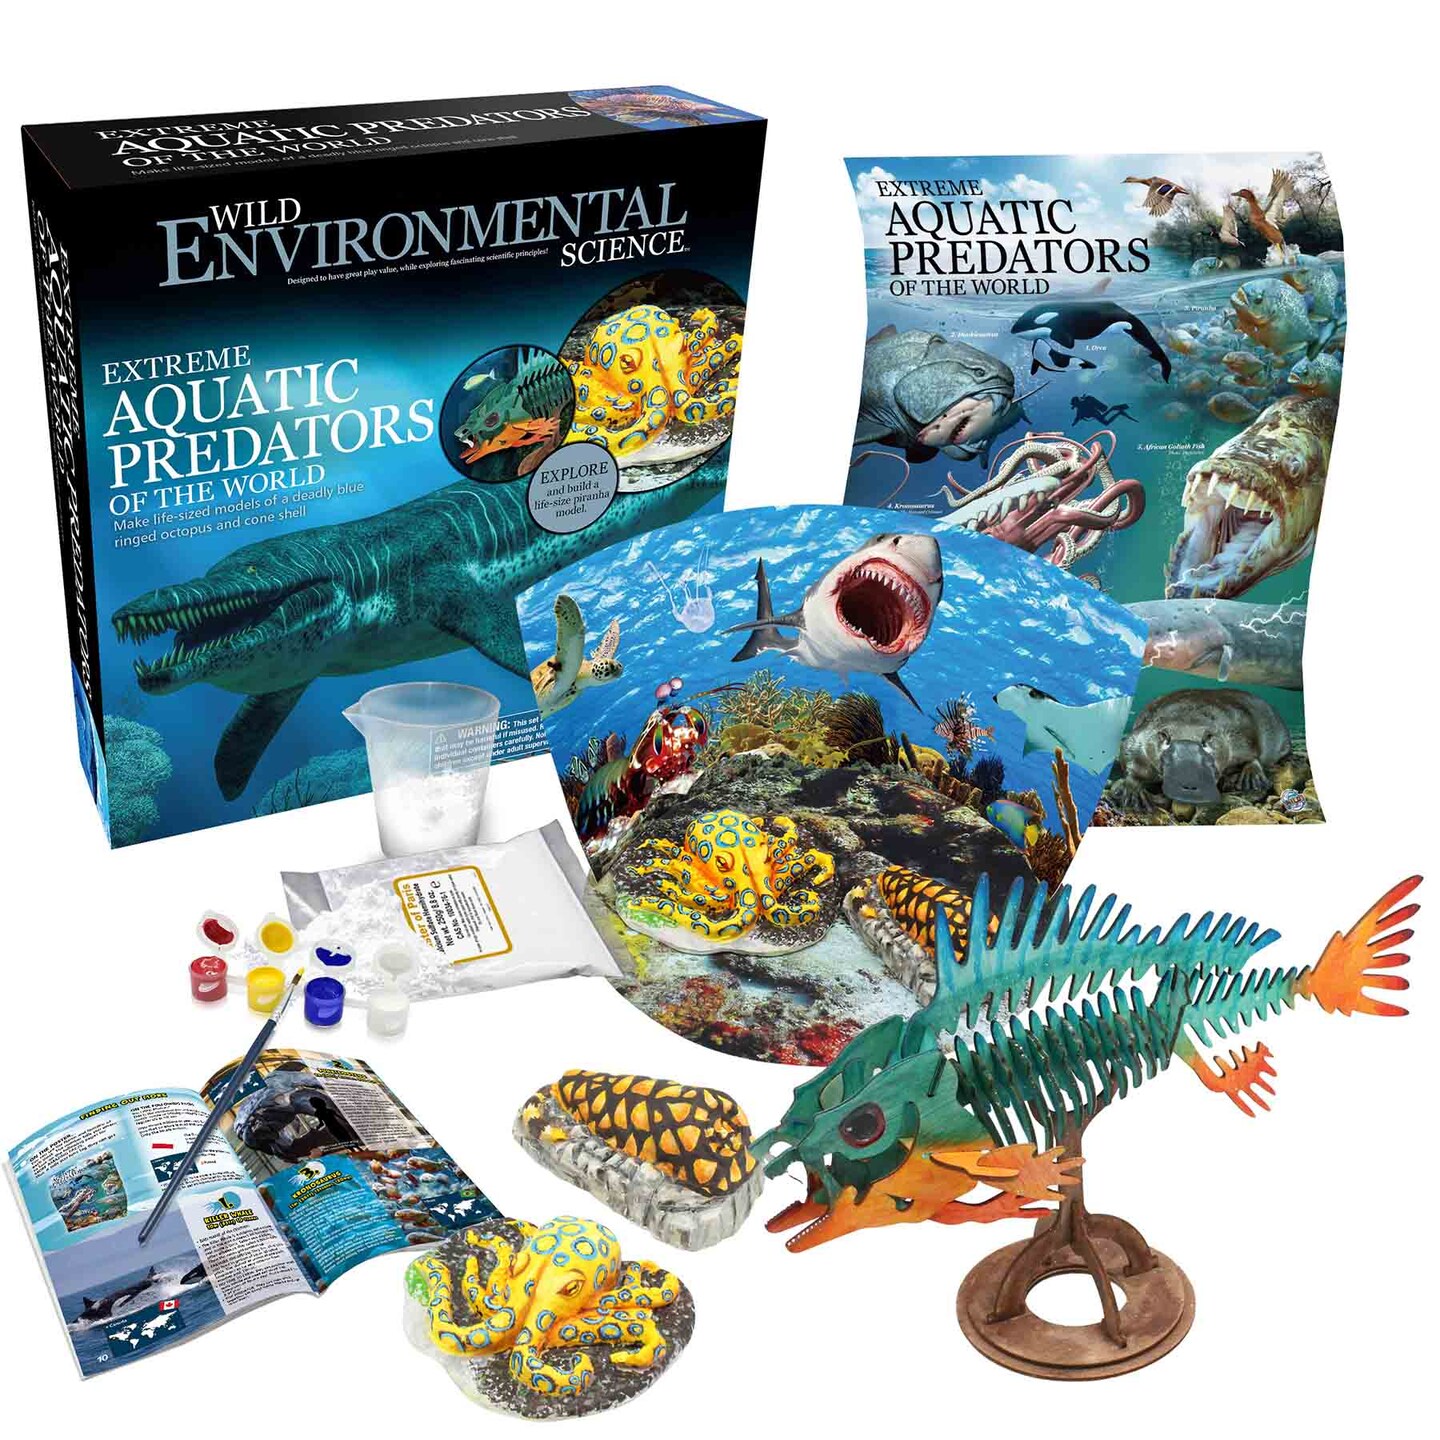 Extreme Aquatic Predators of the World - Ages 6+ - Create and Customize Models and Dioramas - Study Extreme Ocean Animals